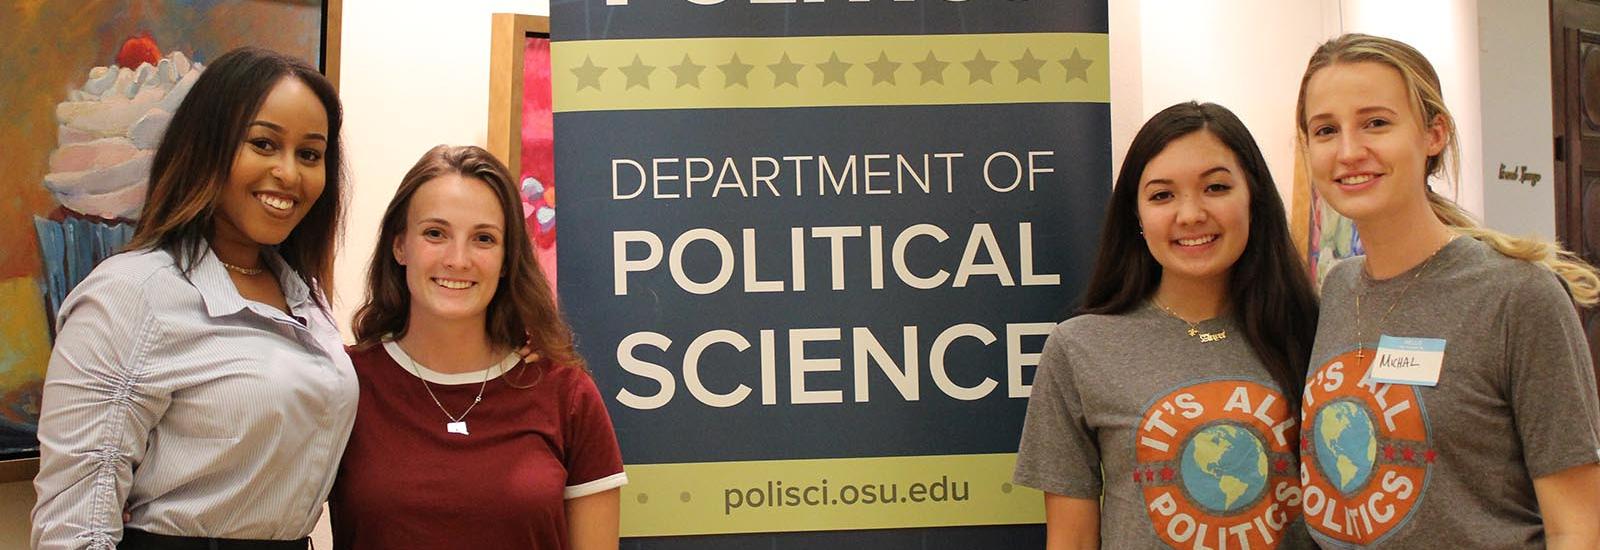 Students standing in front of a department banner